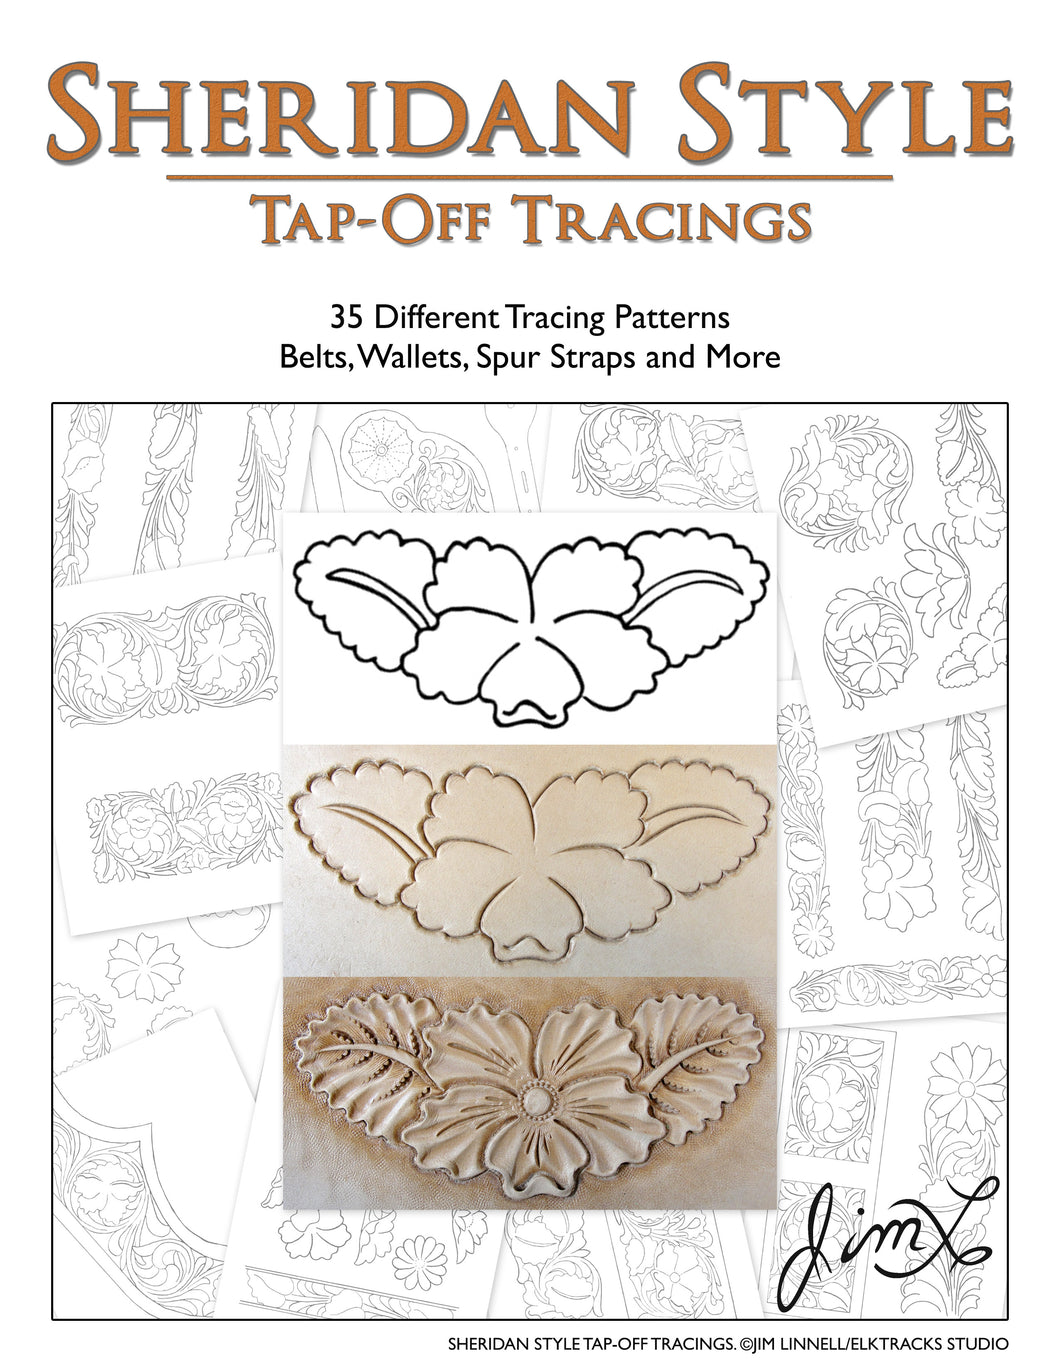 Sheridan Style Tap-Off Tracings by Jim Linnell